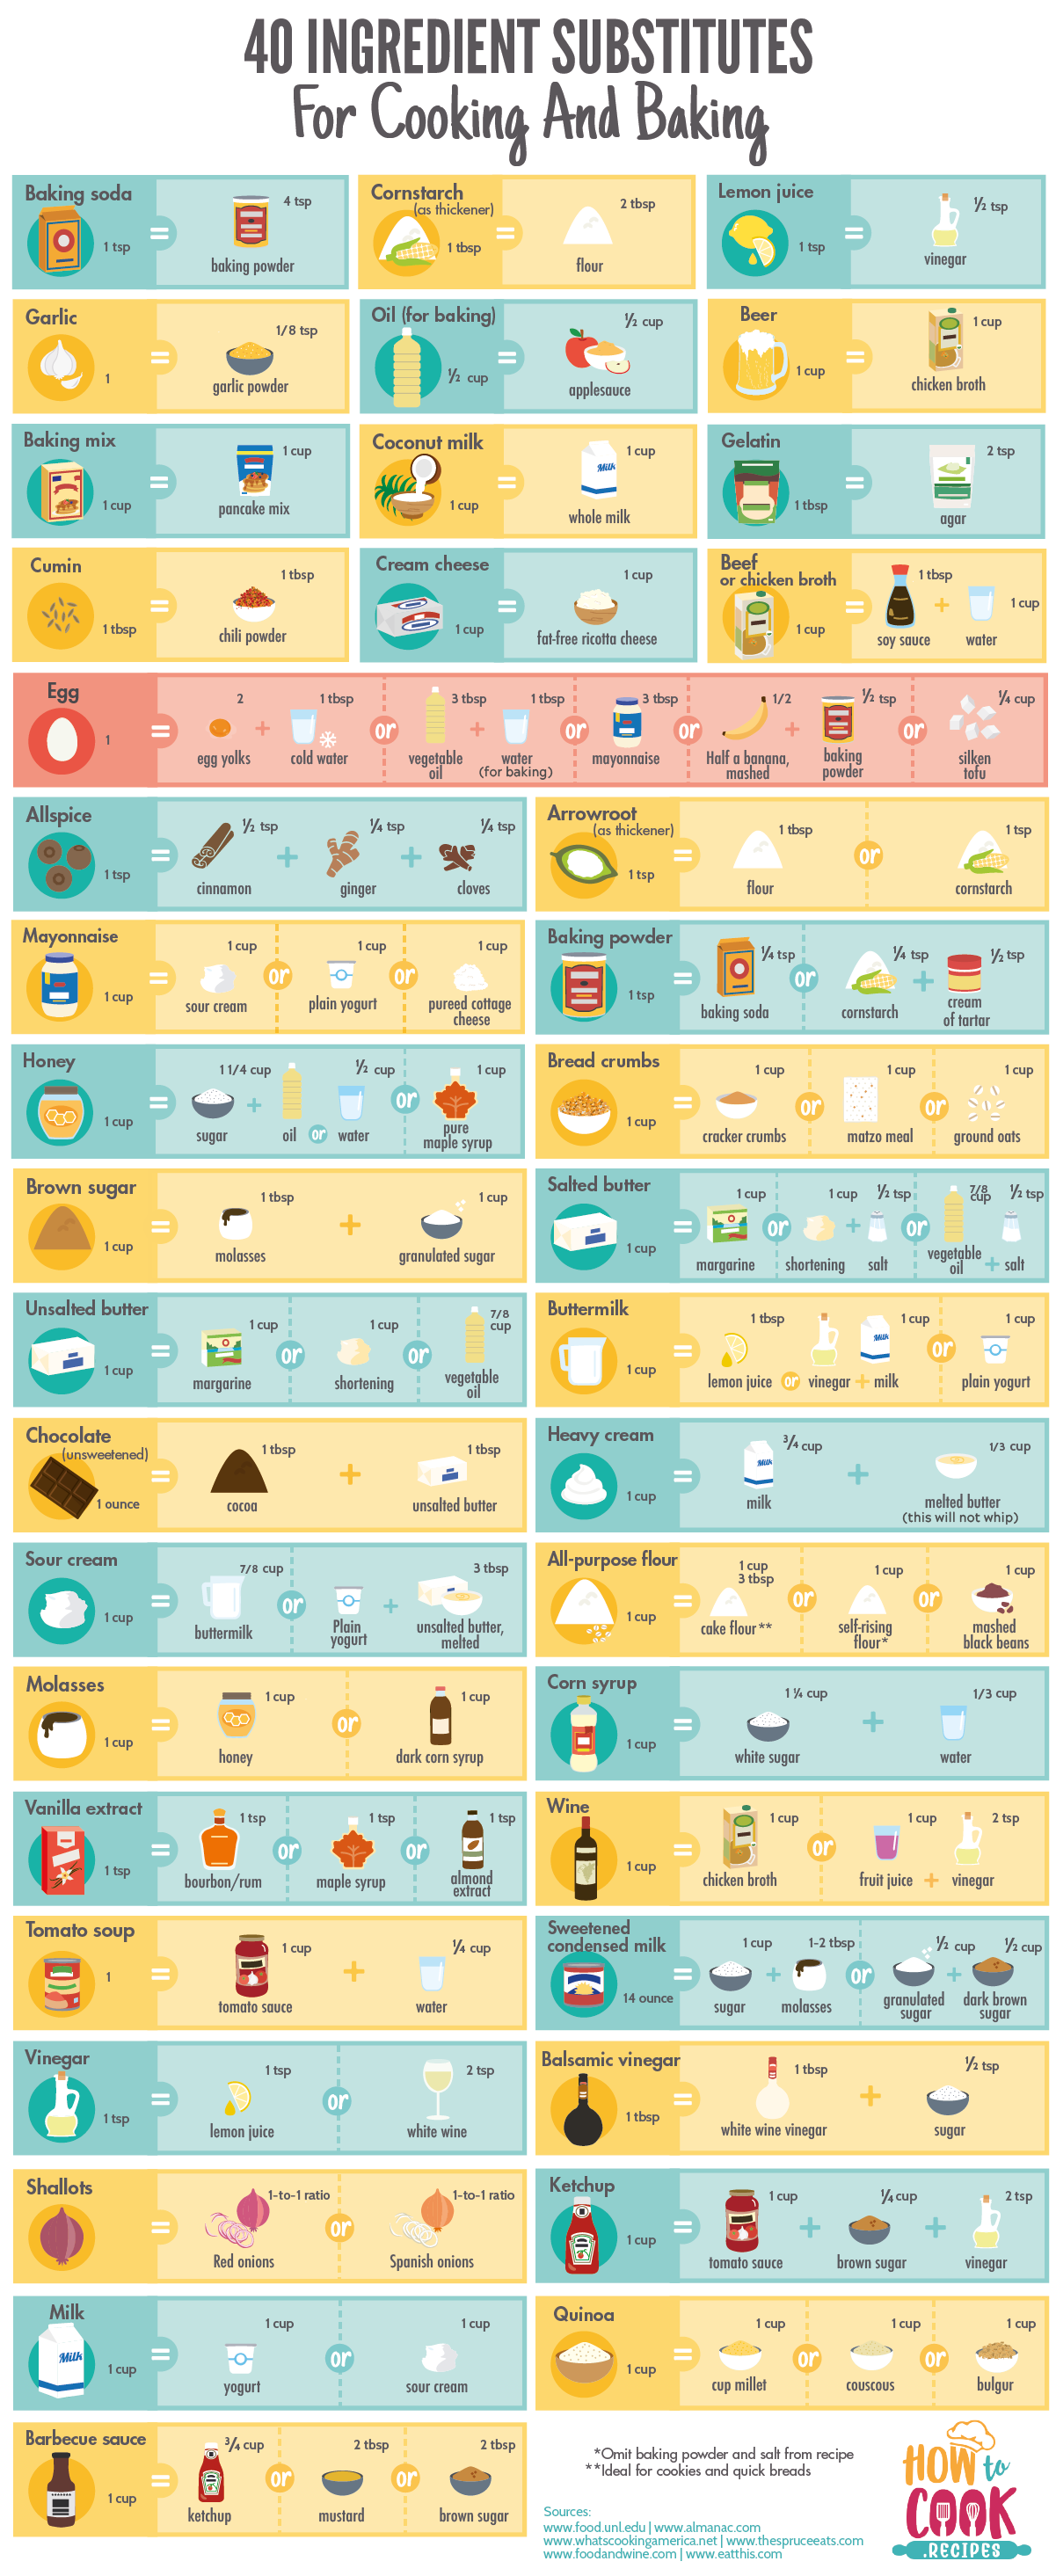 40 Ingredient Substitutes For Cooking And Baking